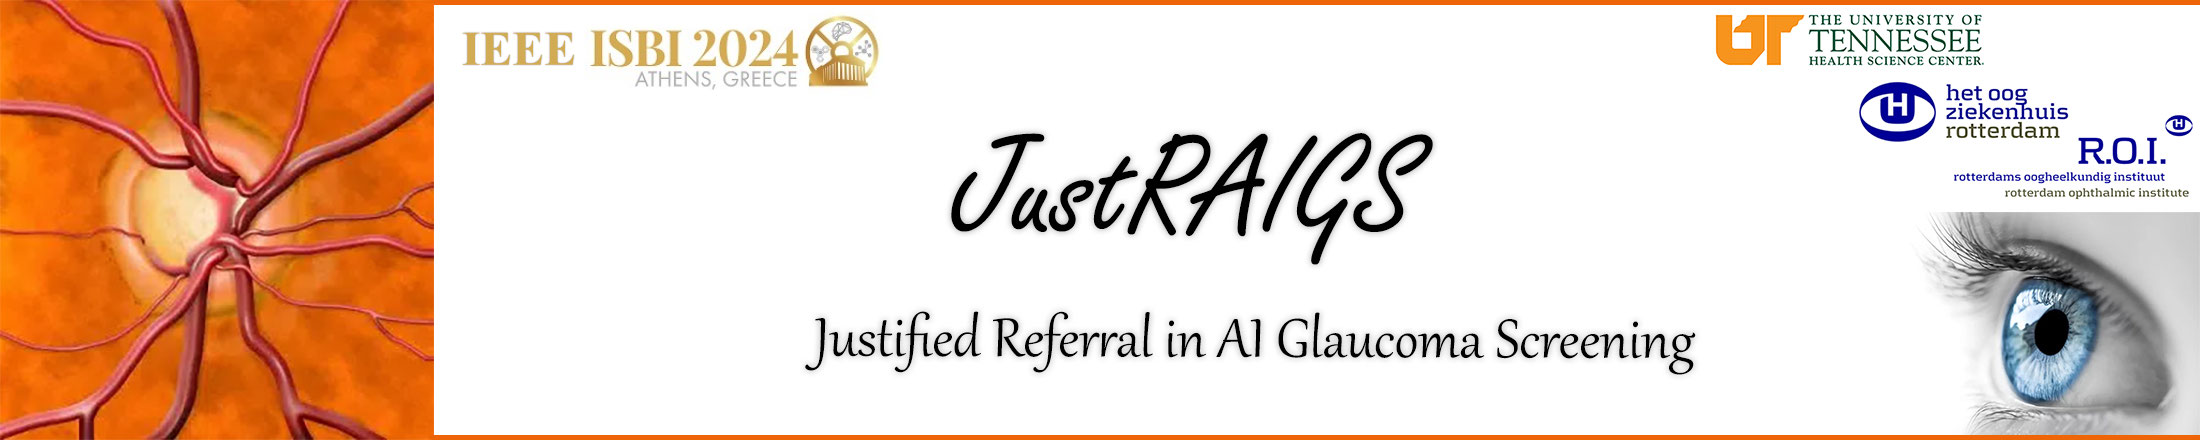 Justified Referral in AI Glaucoma Screening Banner